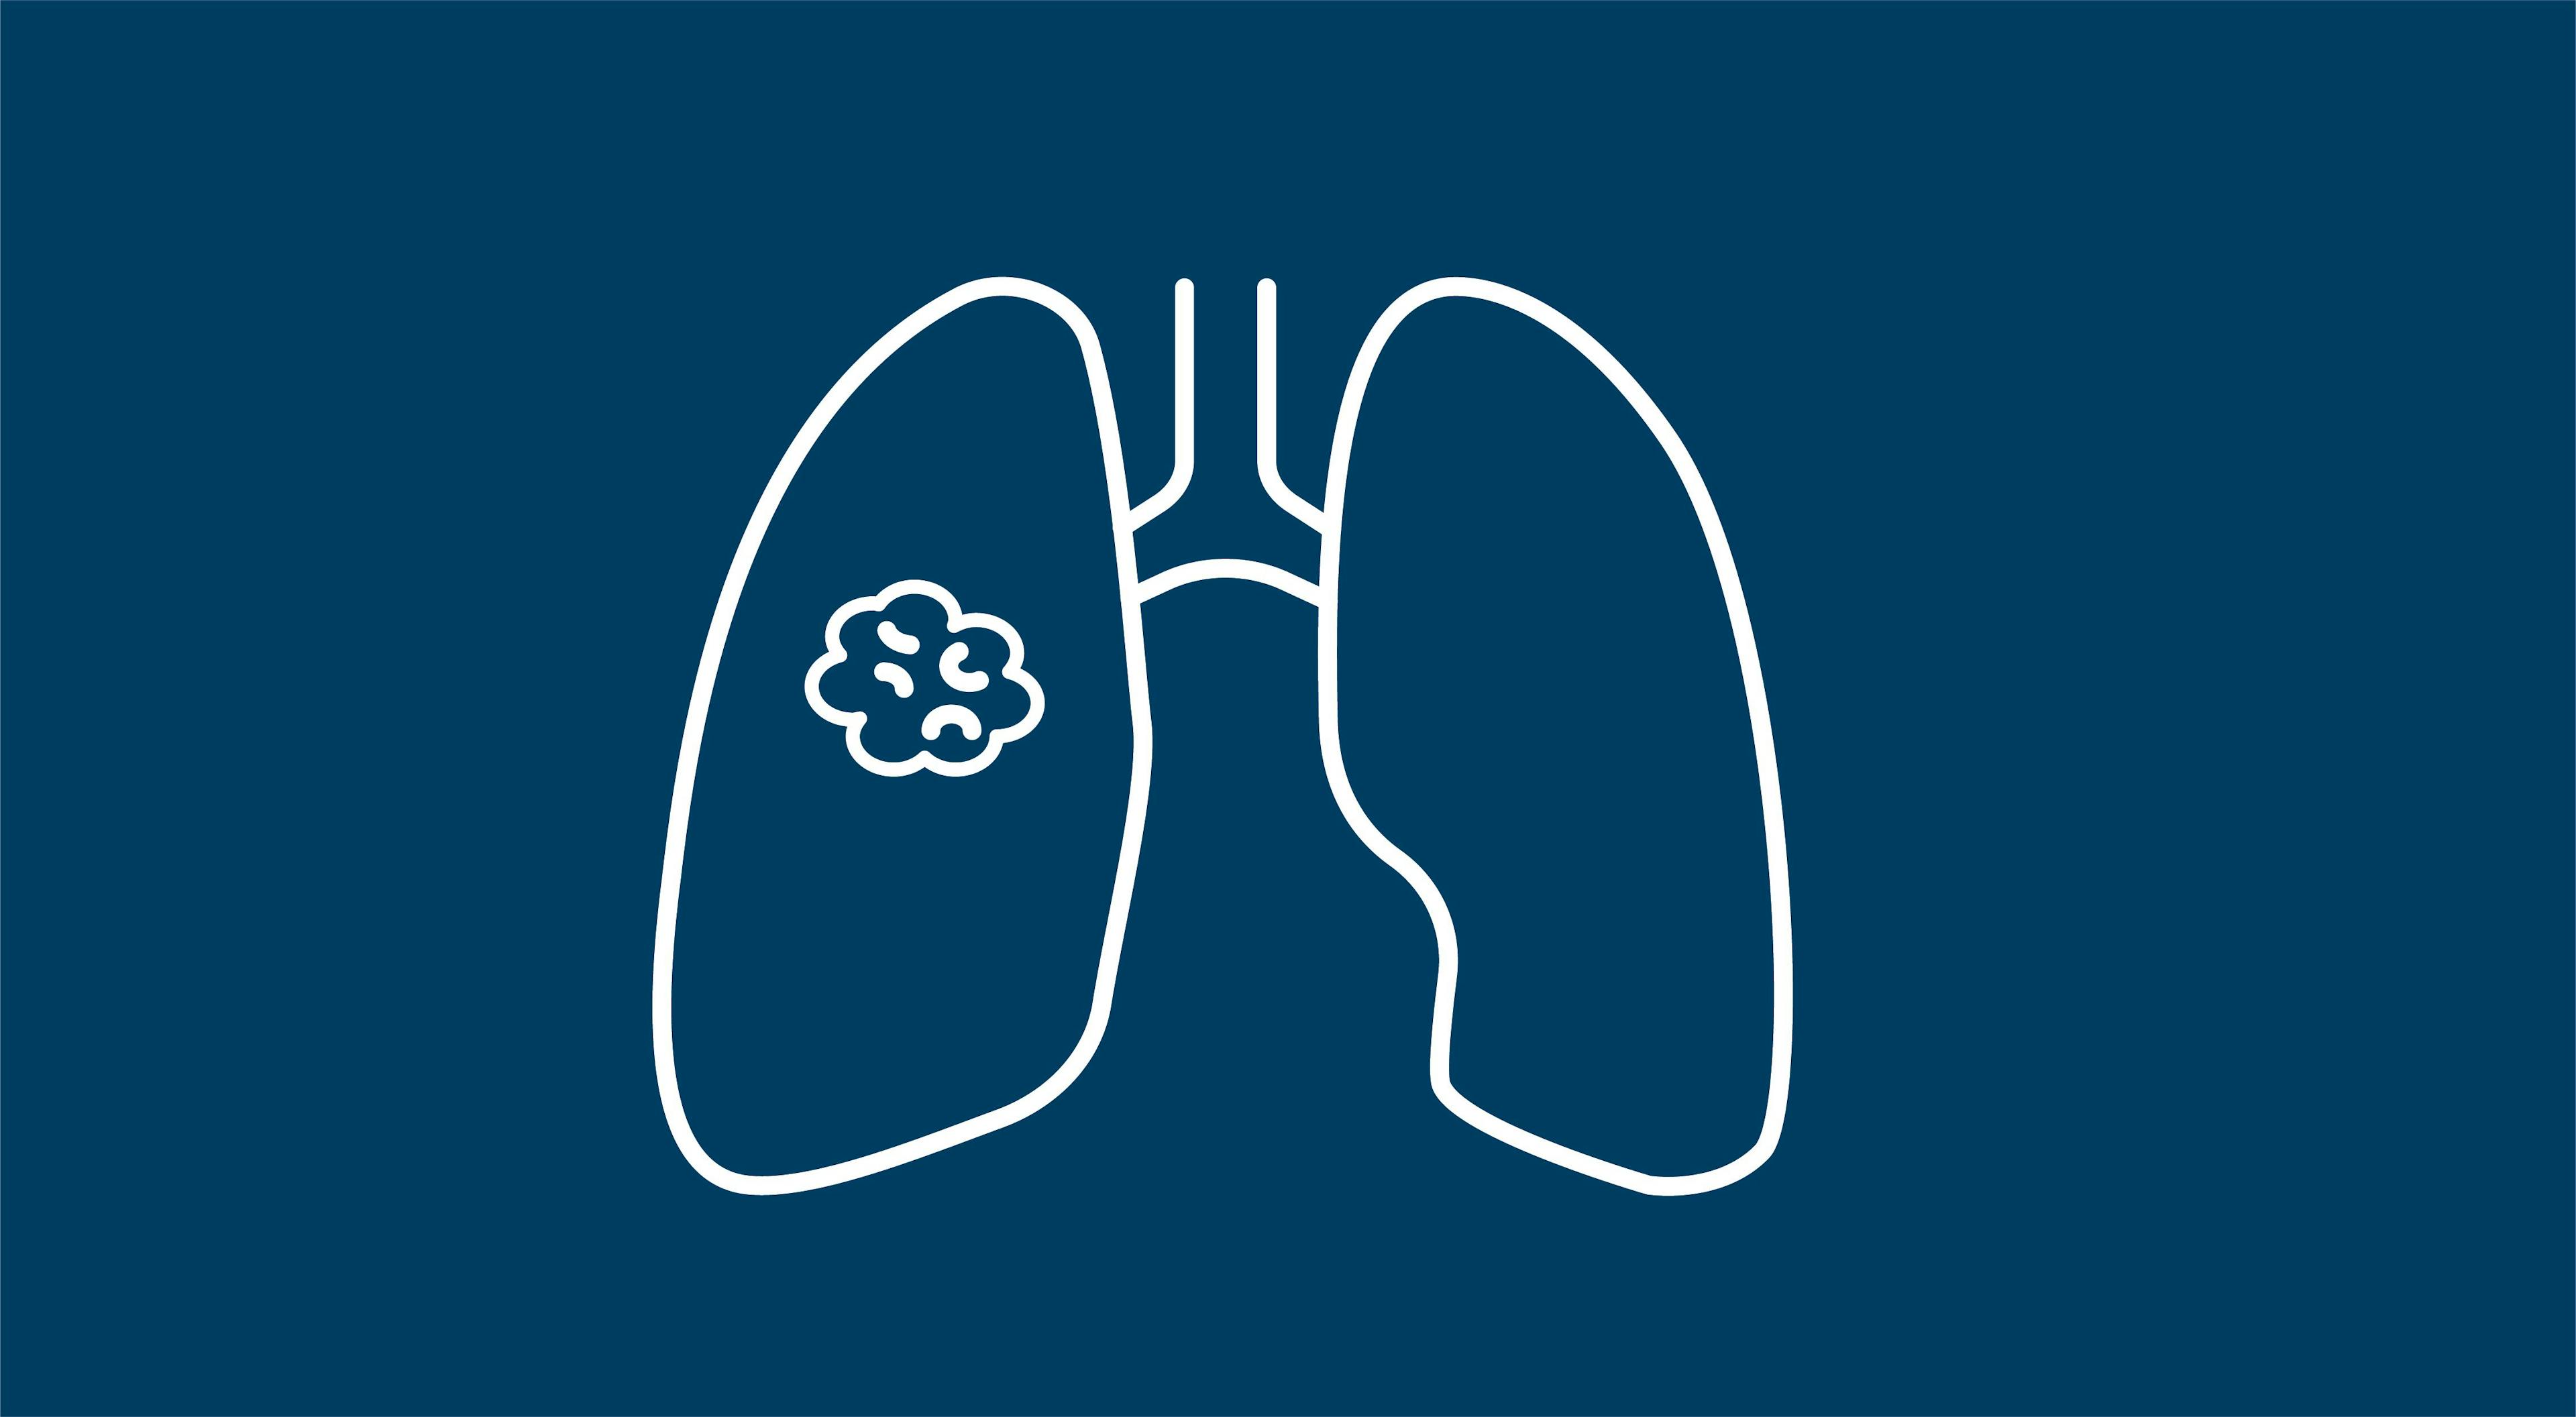 Experts Make the Case for More Inclusive Lung Cancer Screening Guidelines